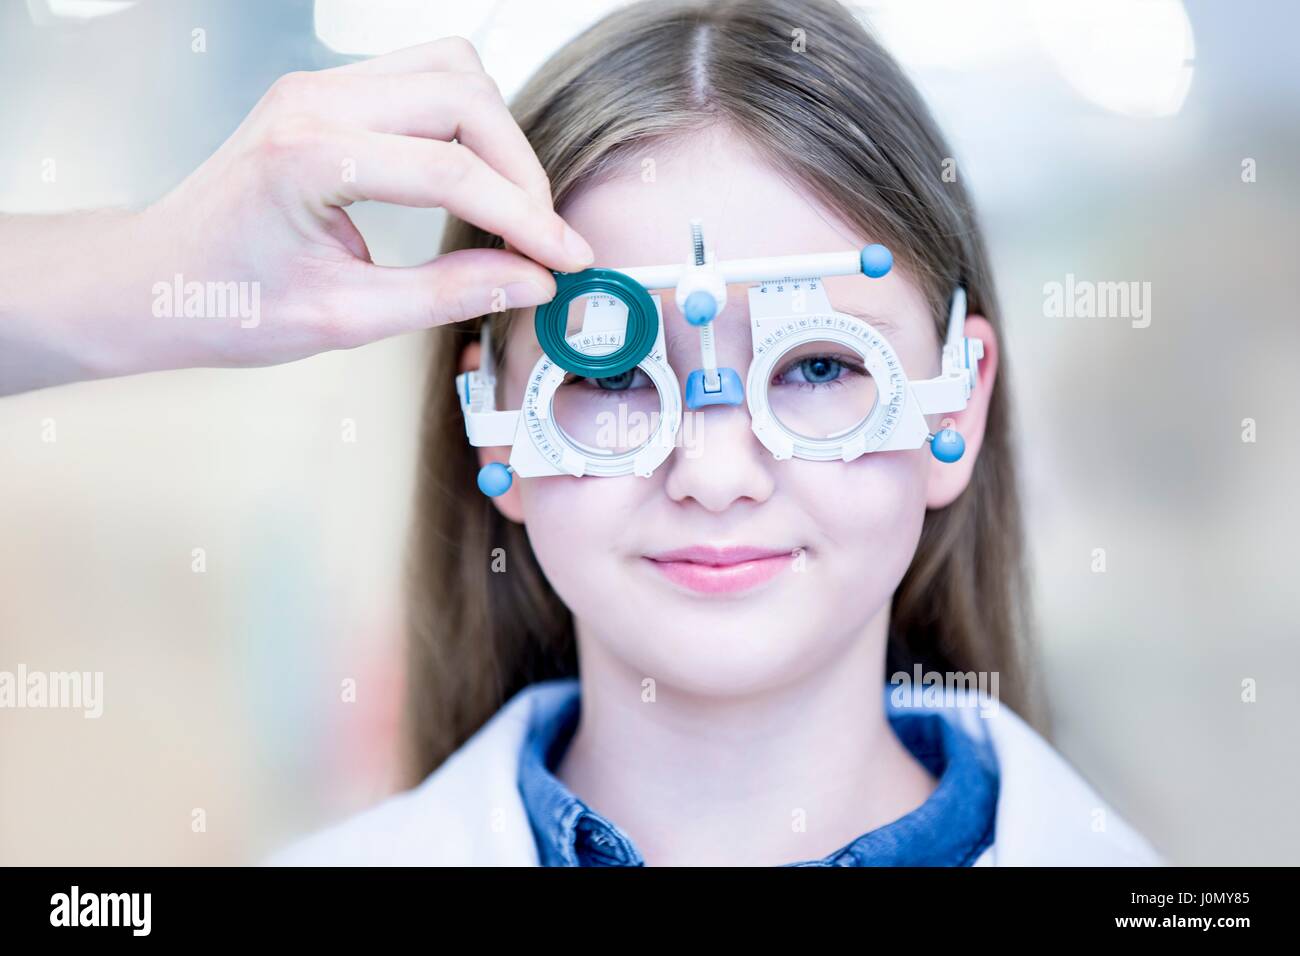 Portrait of Girl wearing trial frame, close-up. Banque D'Images